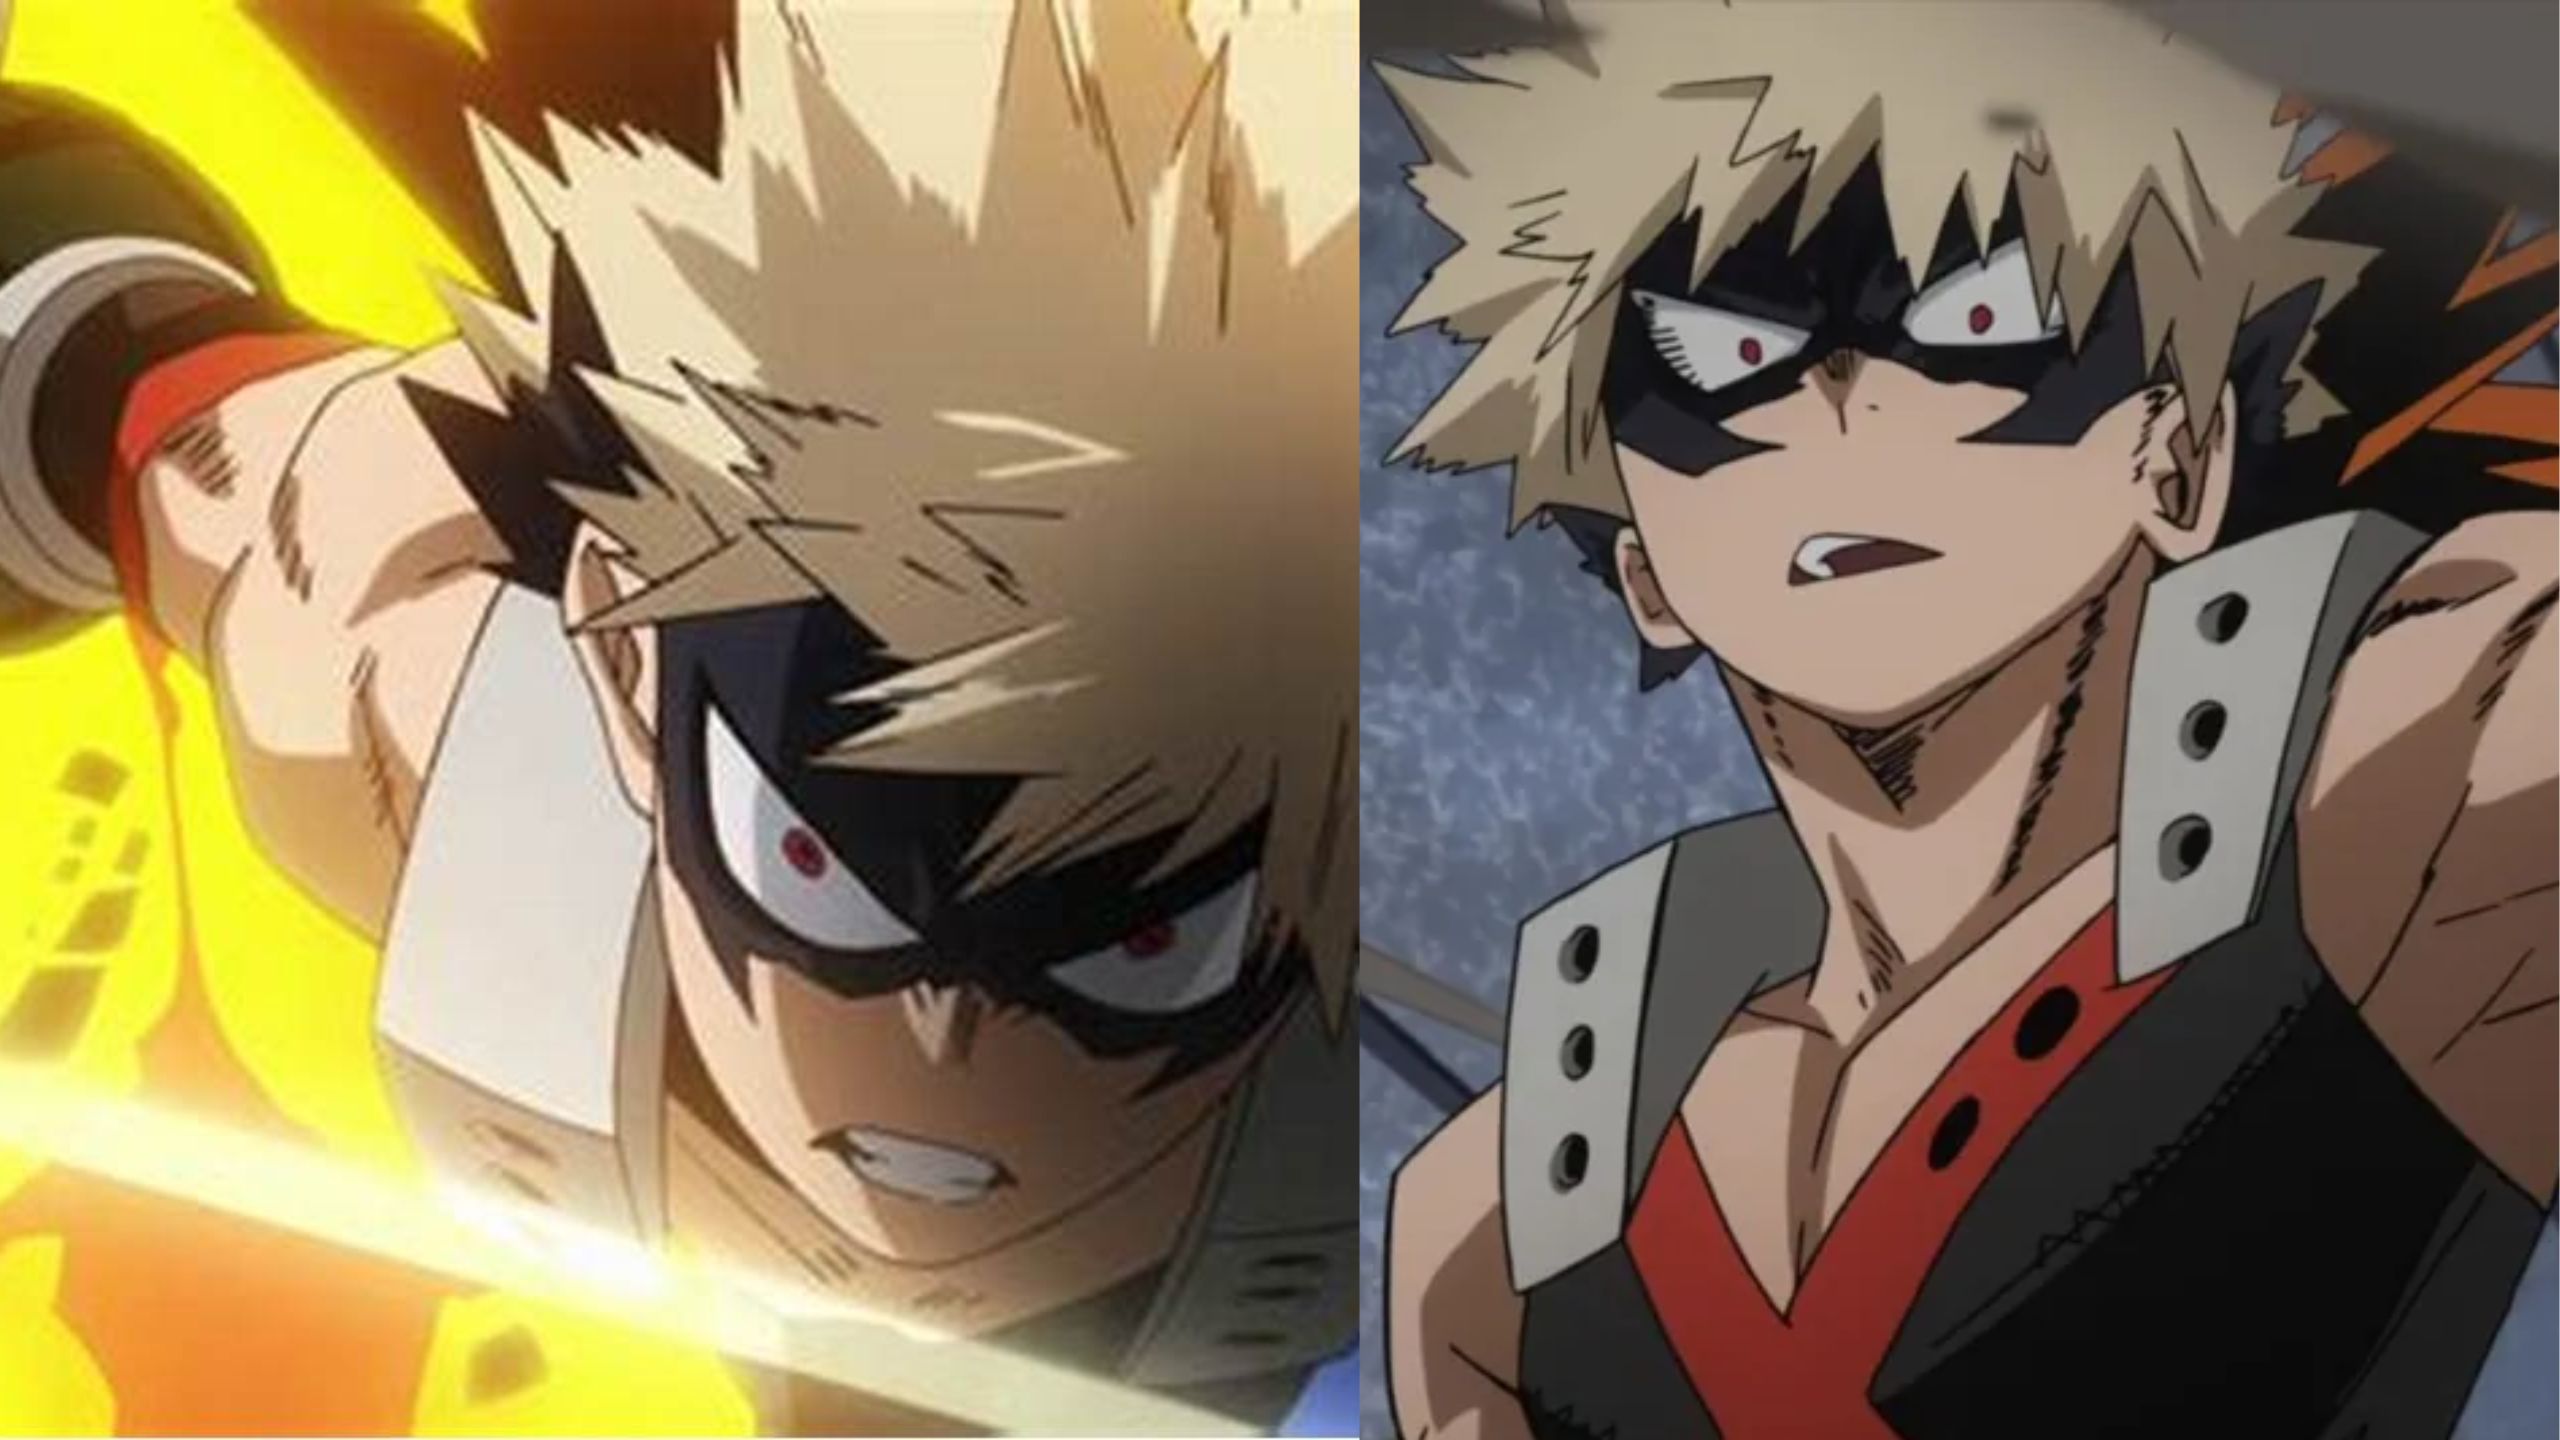 Choosing One For All: Why These My Hero Academia Characters Are Perfect Fits